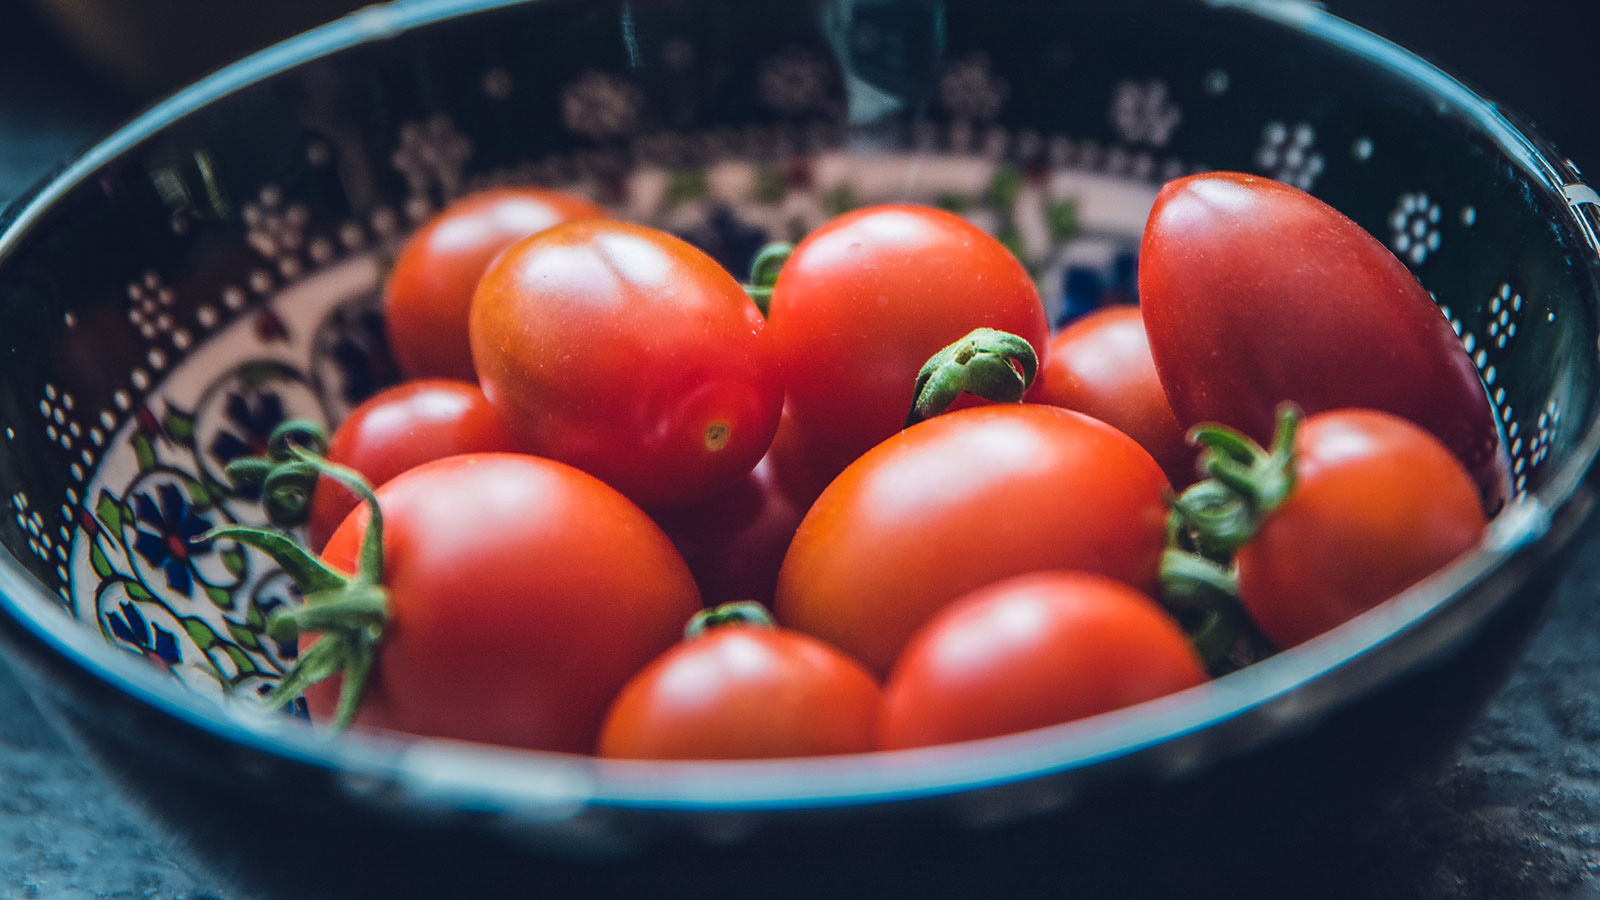 https://theneffkitchen.com.au/wp-content/uploads/2018/01/NEFF_featured_how_to_store_tomatoes.jpg